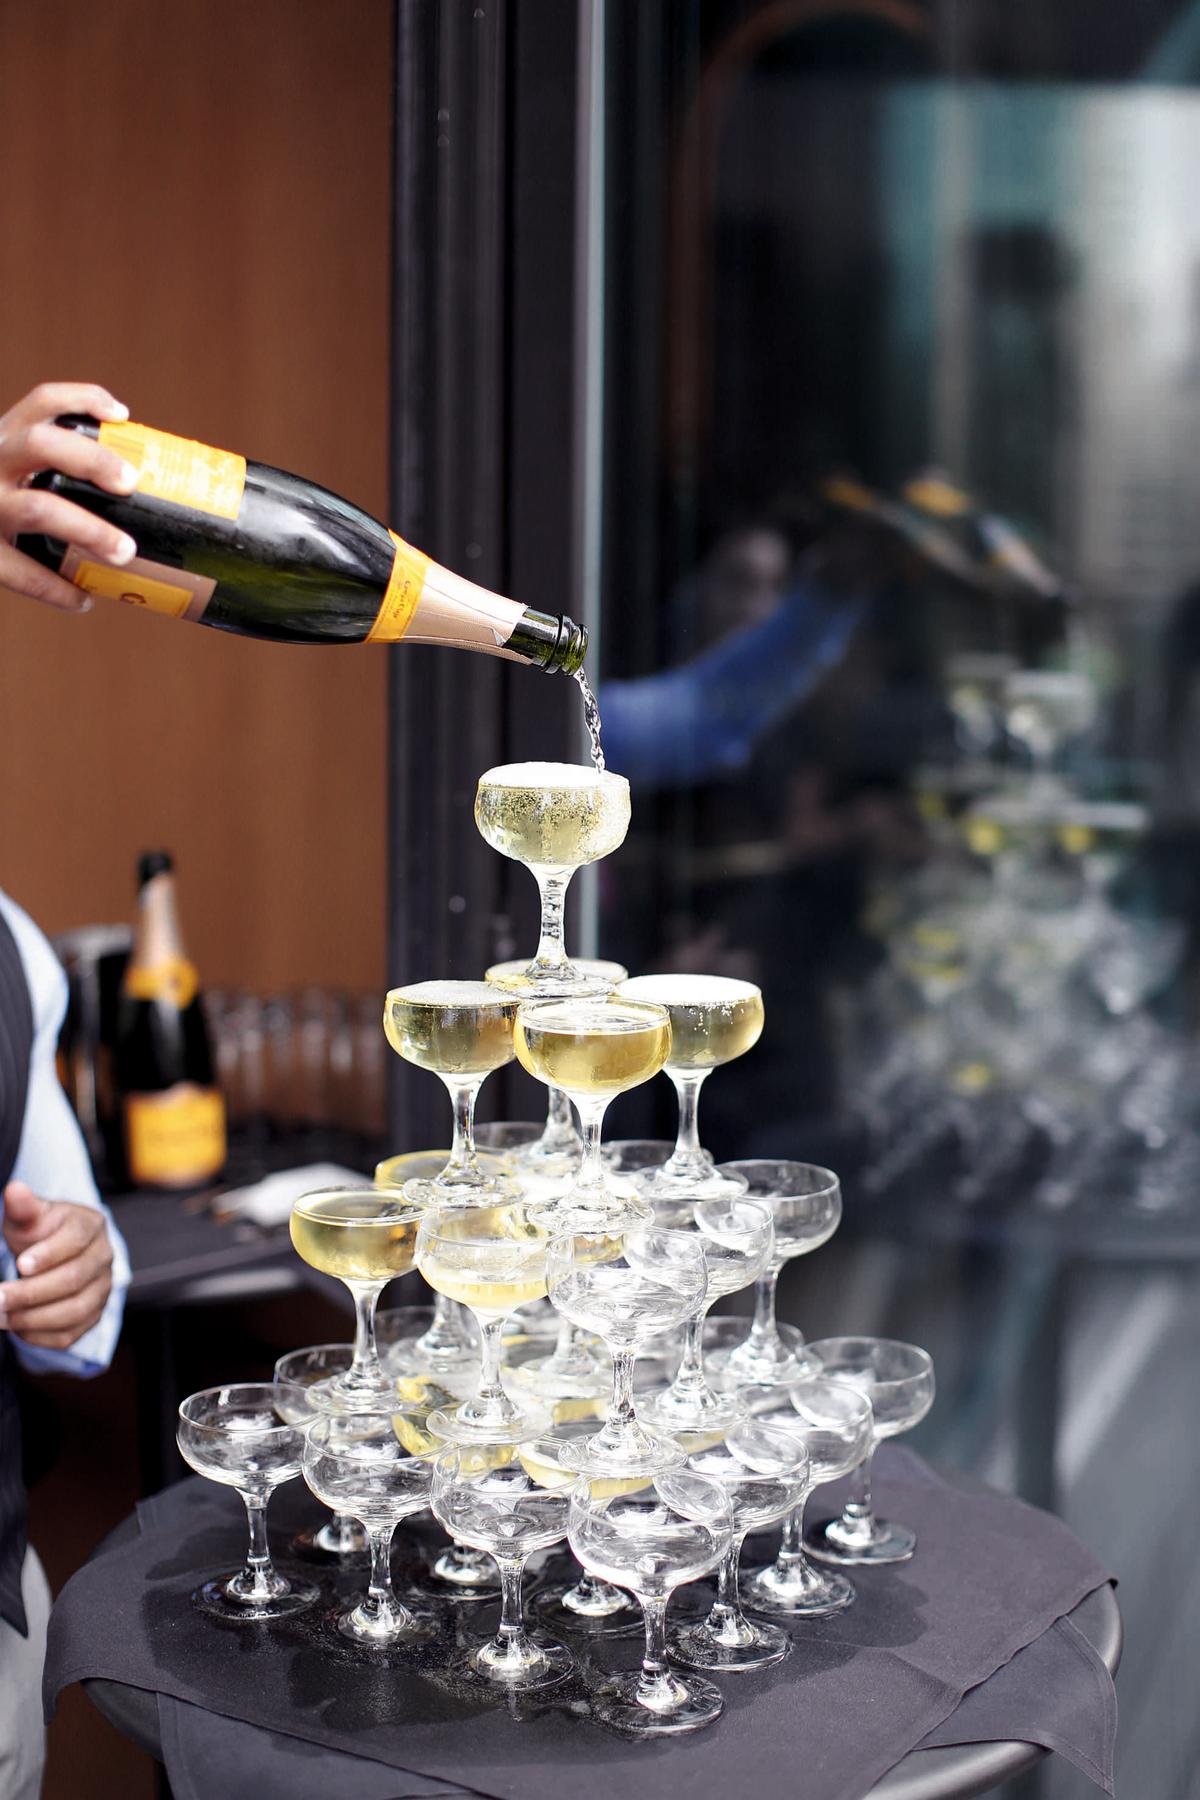 The daily Cava Pour at Castell Rooftop in Midtown Manhattan. (Clay Williams for 111 Places. http://claywilliamsphoto.com)